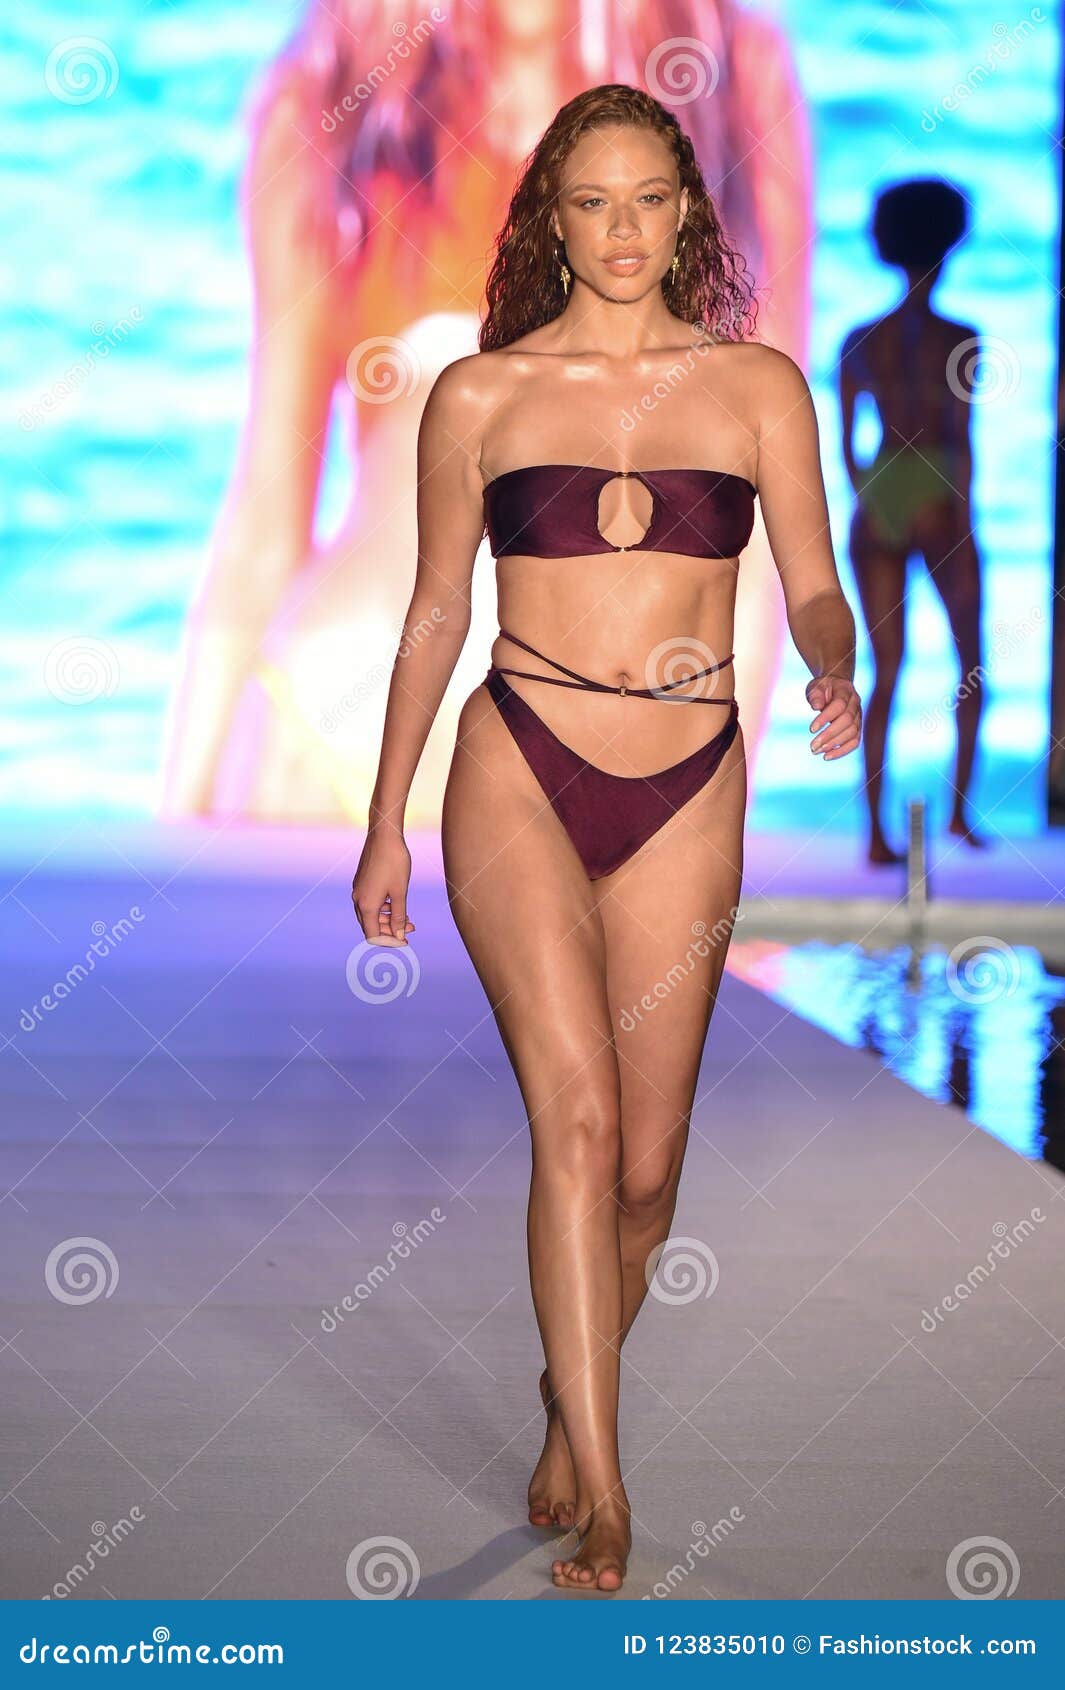 A Model Walks the for the 2018 Sports Swimsuit Editorial Image - Image of catwalk, attractive: 123835010